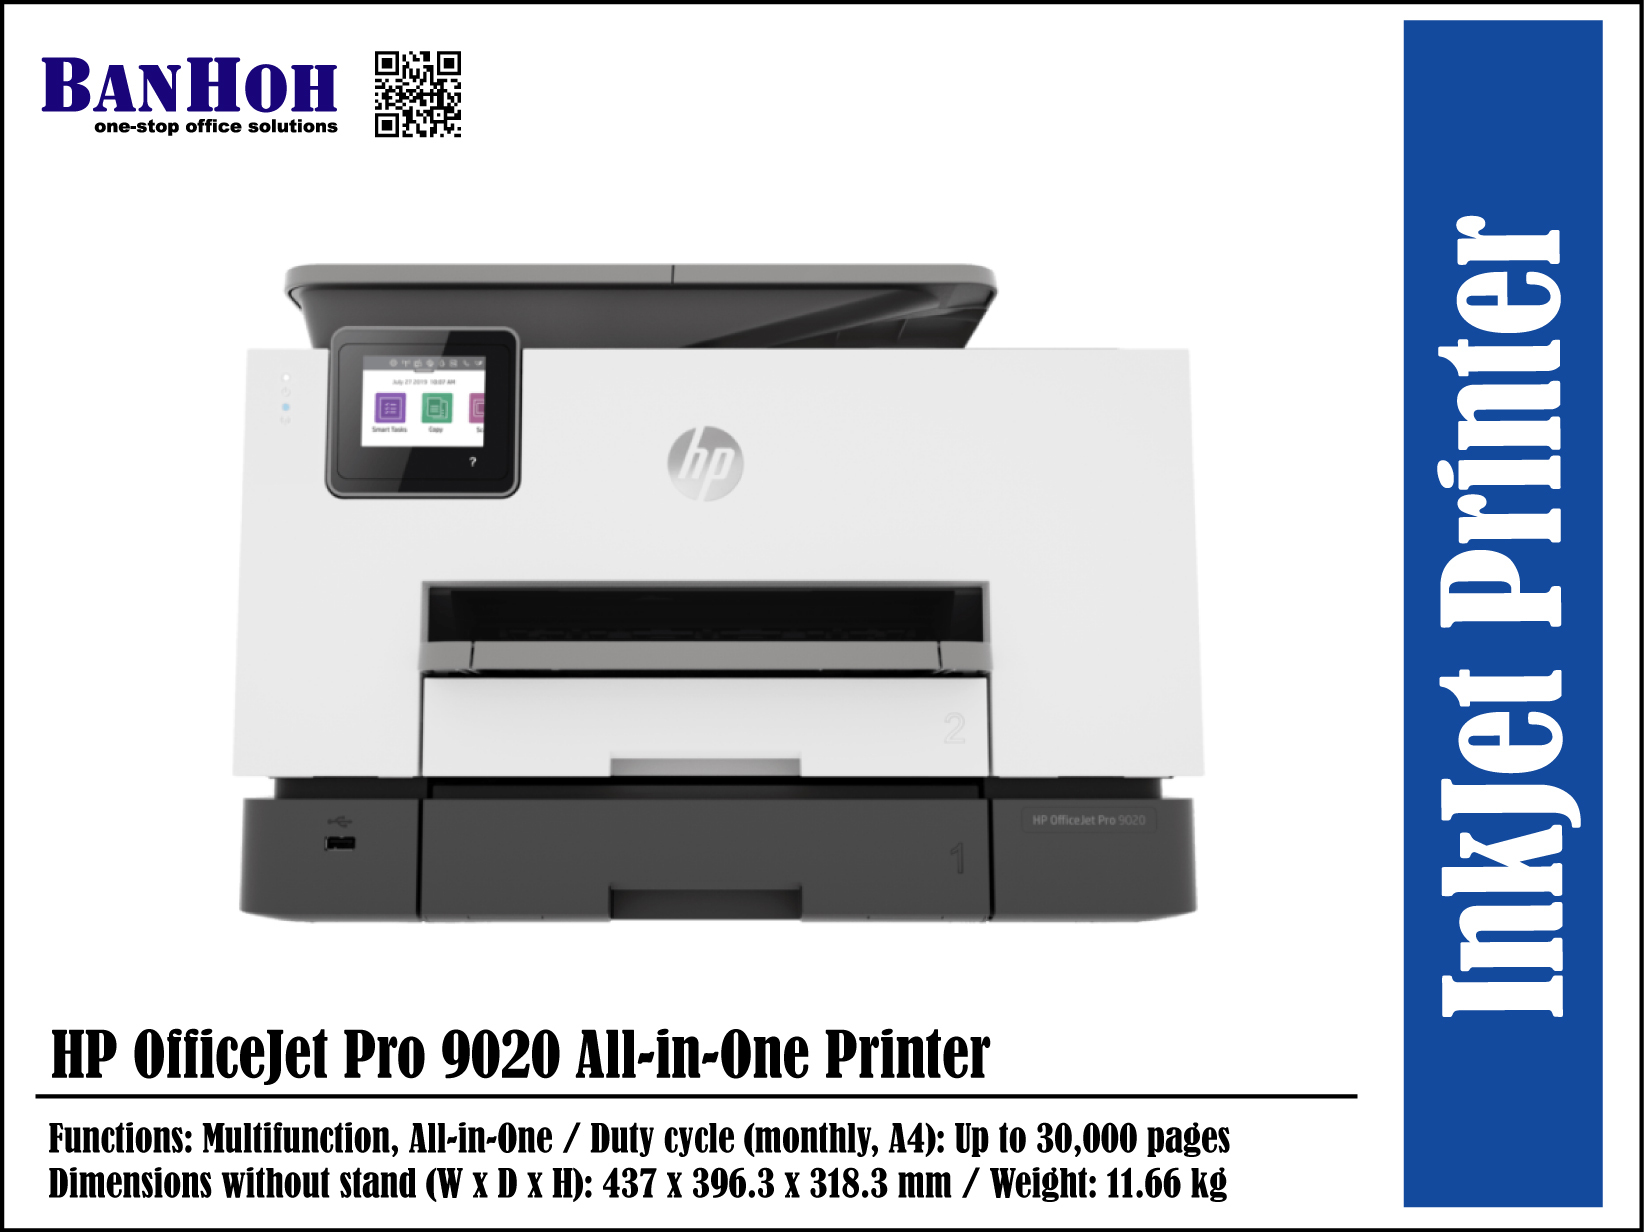 HP OfficeJet Pro 9020 All-in-One Printer – BANHOH SDN BHD